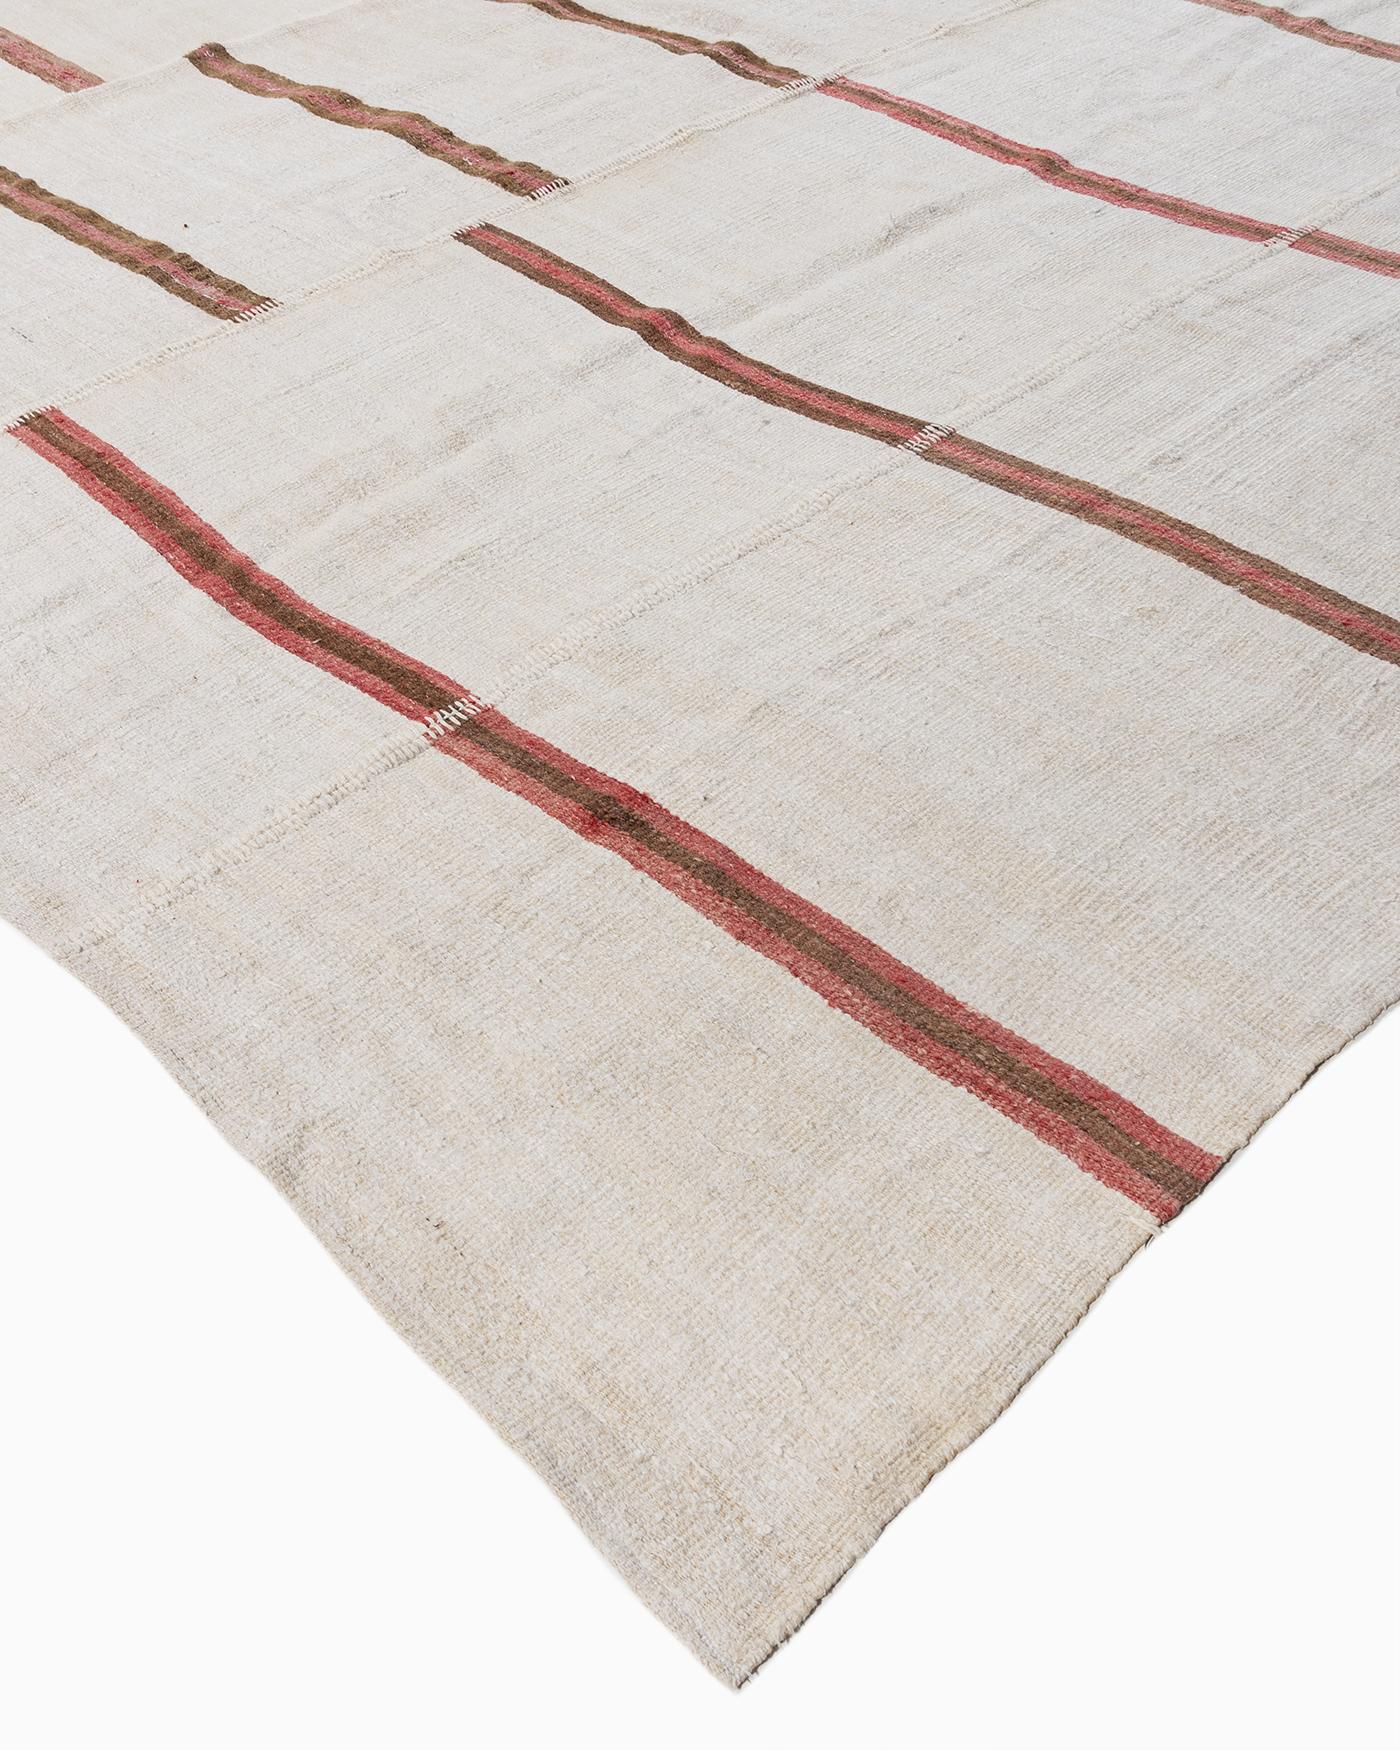 Large Vintage Turkish Kilim Flat Weave rug runner 14' X 26'. An oversize hand woven flatweave hemp rug. The simplicity and boldness of this piece gives a contemporary feel and can look at home in both a modern or traditional setting.
 